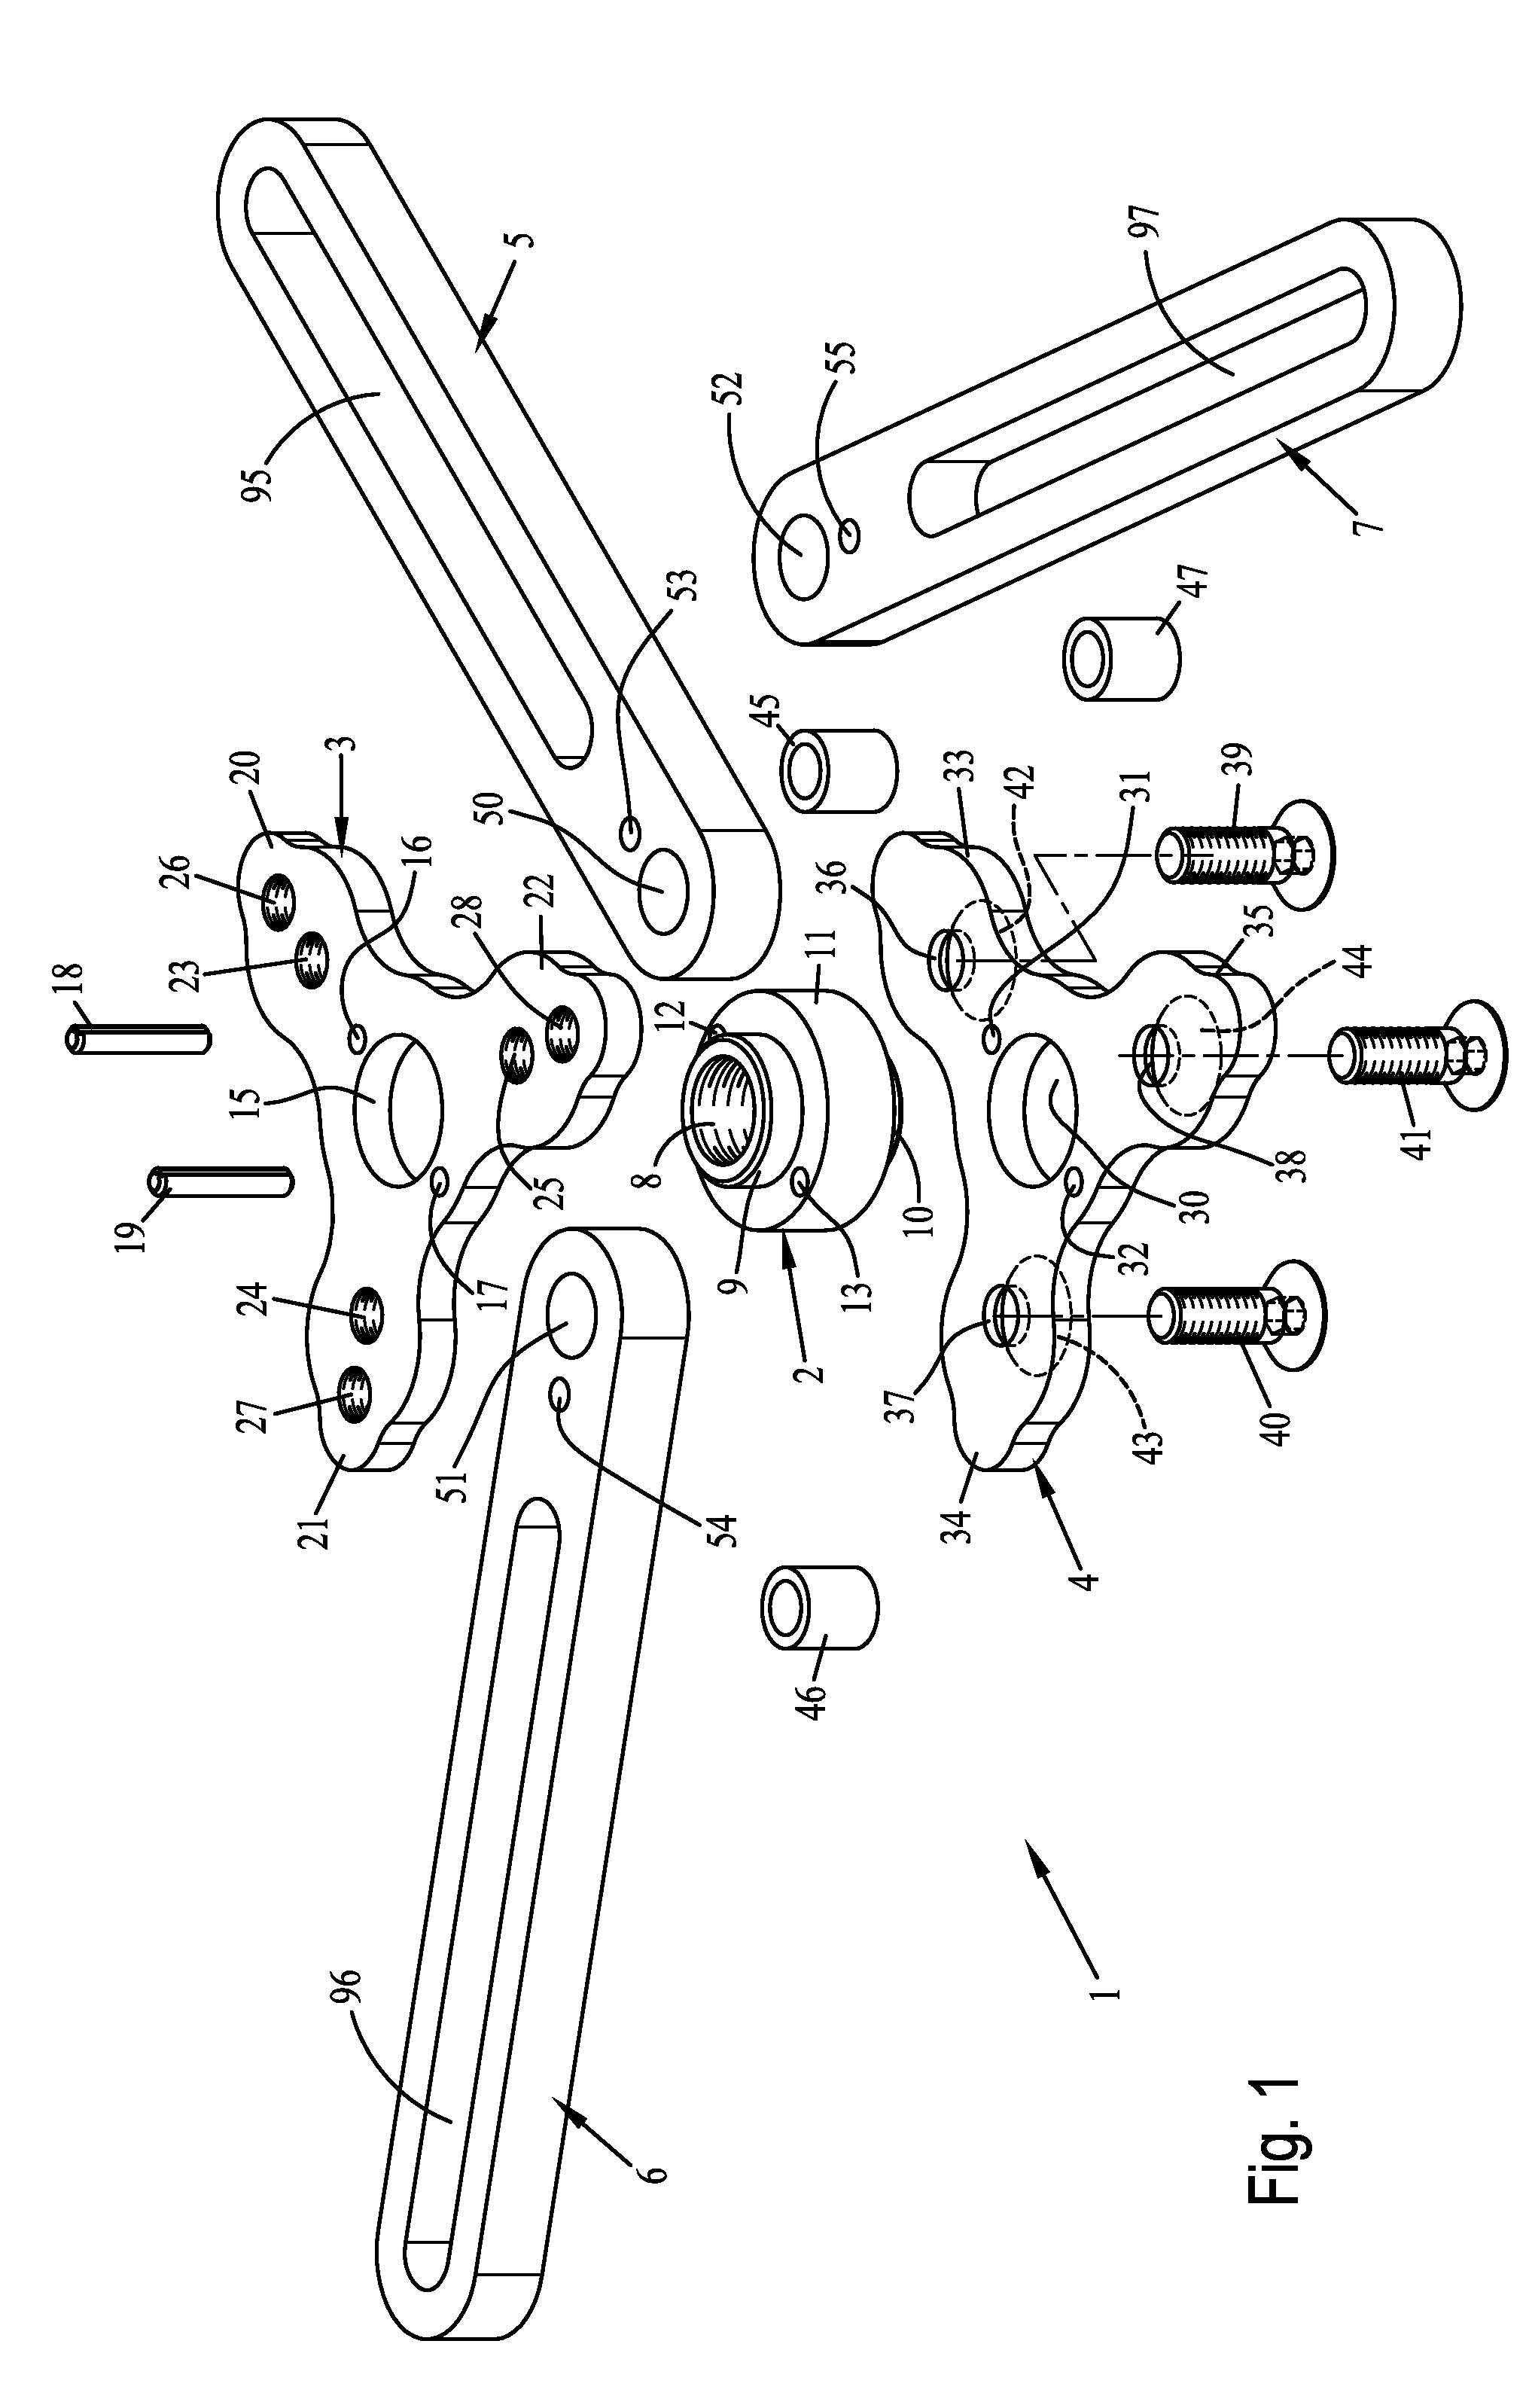 Device for pressing on a double clutch